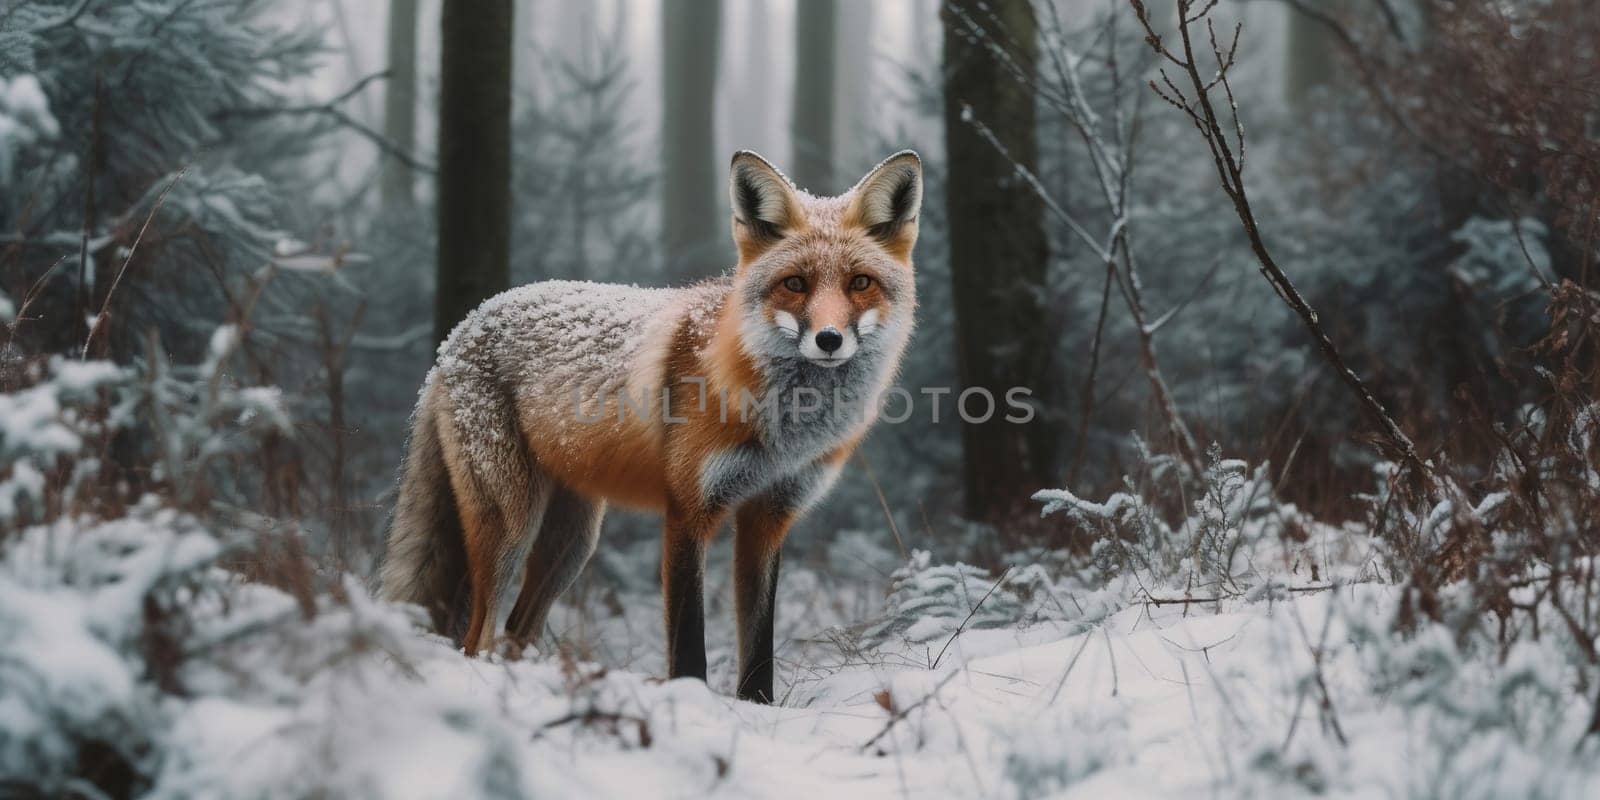 Red Fox In The Winter Forest On A Hunting by tan4ikk1